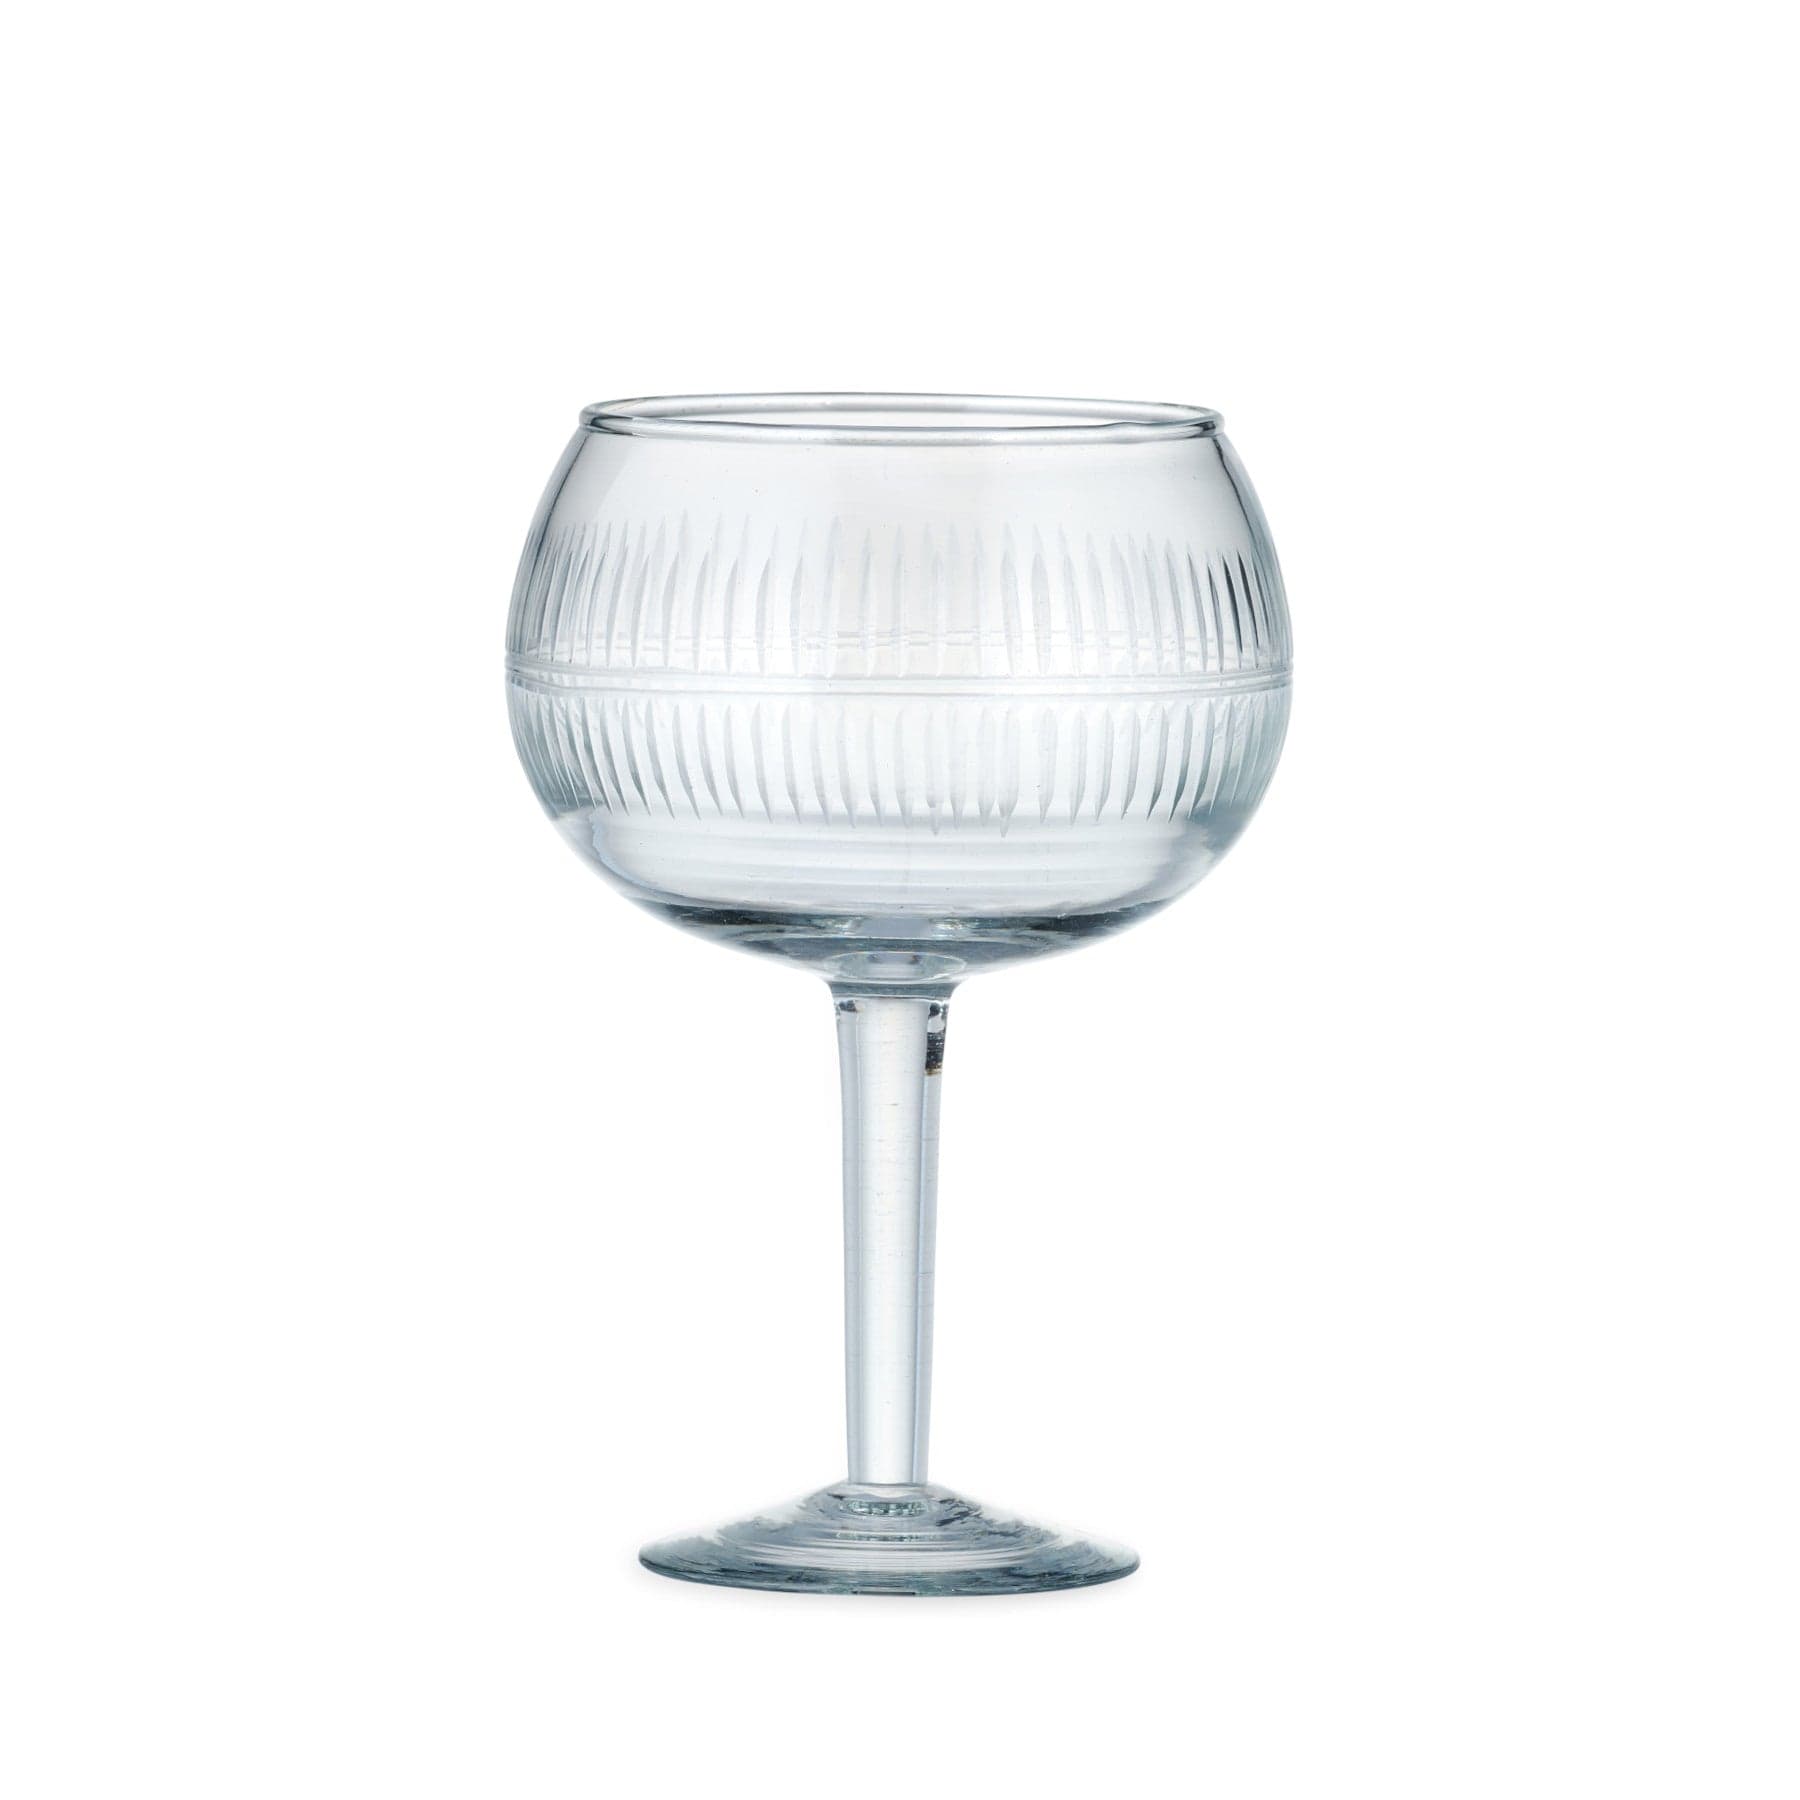 Empty ribbed glass goblet on white background